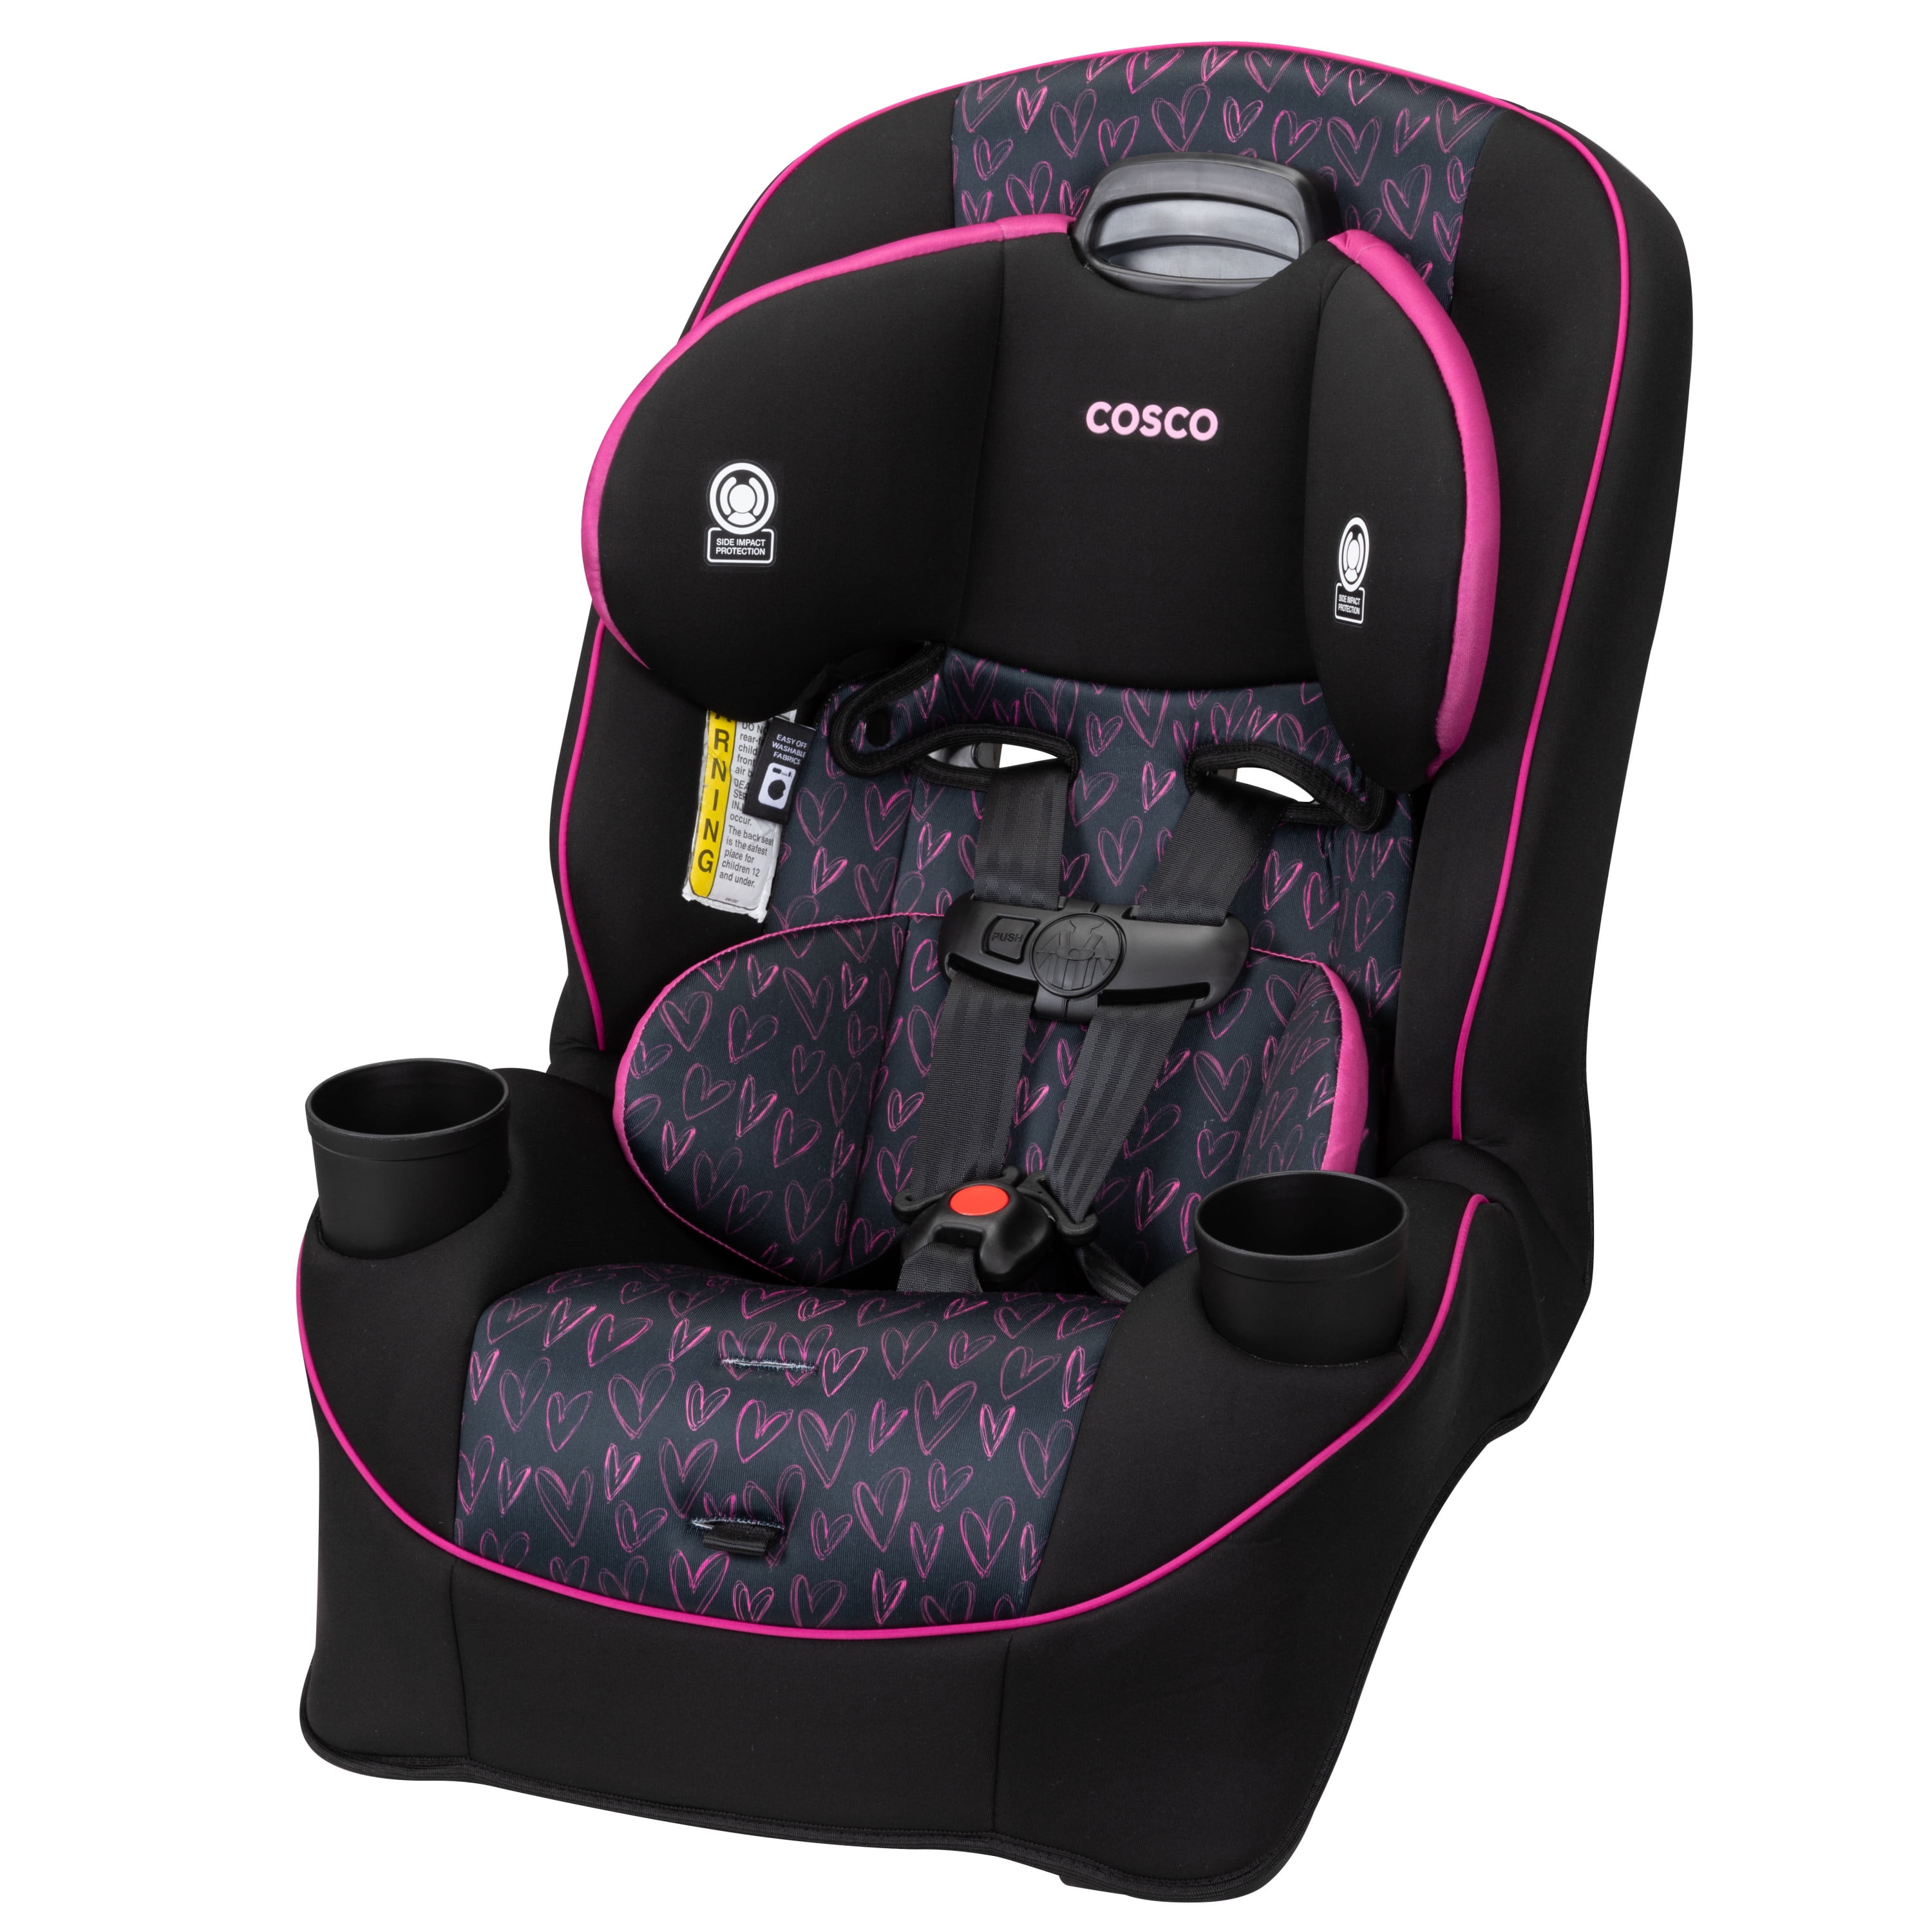 Infant Car Seat Convertible Cosco Baby Toddler Kids Safety Booster Seat Black 